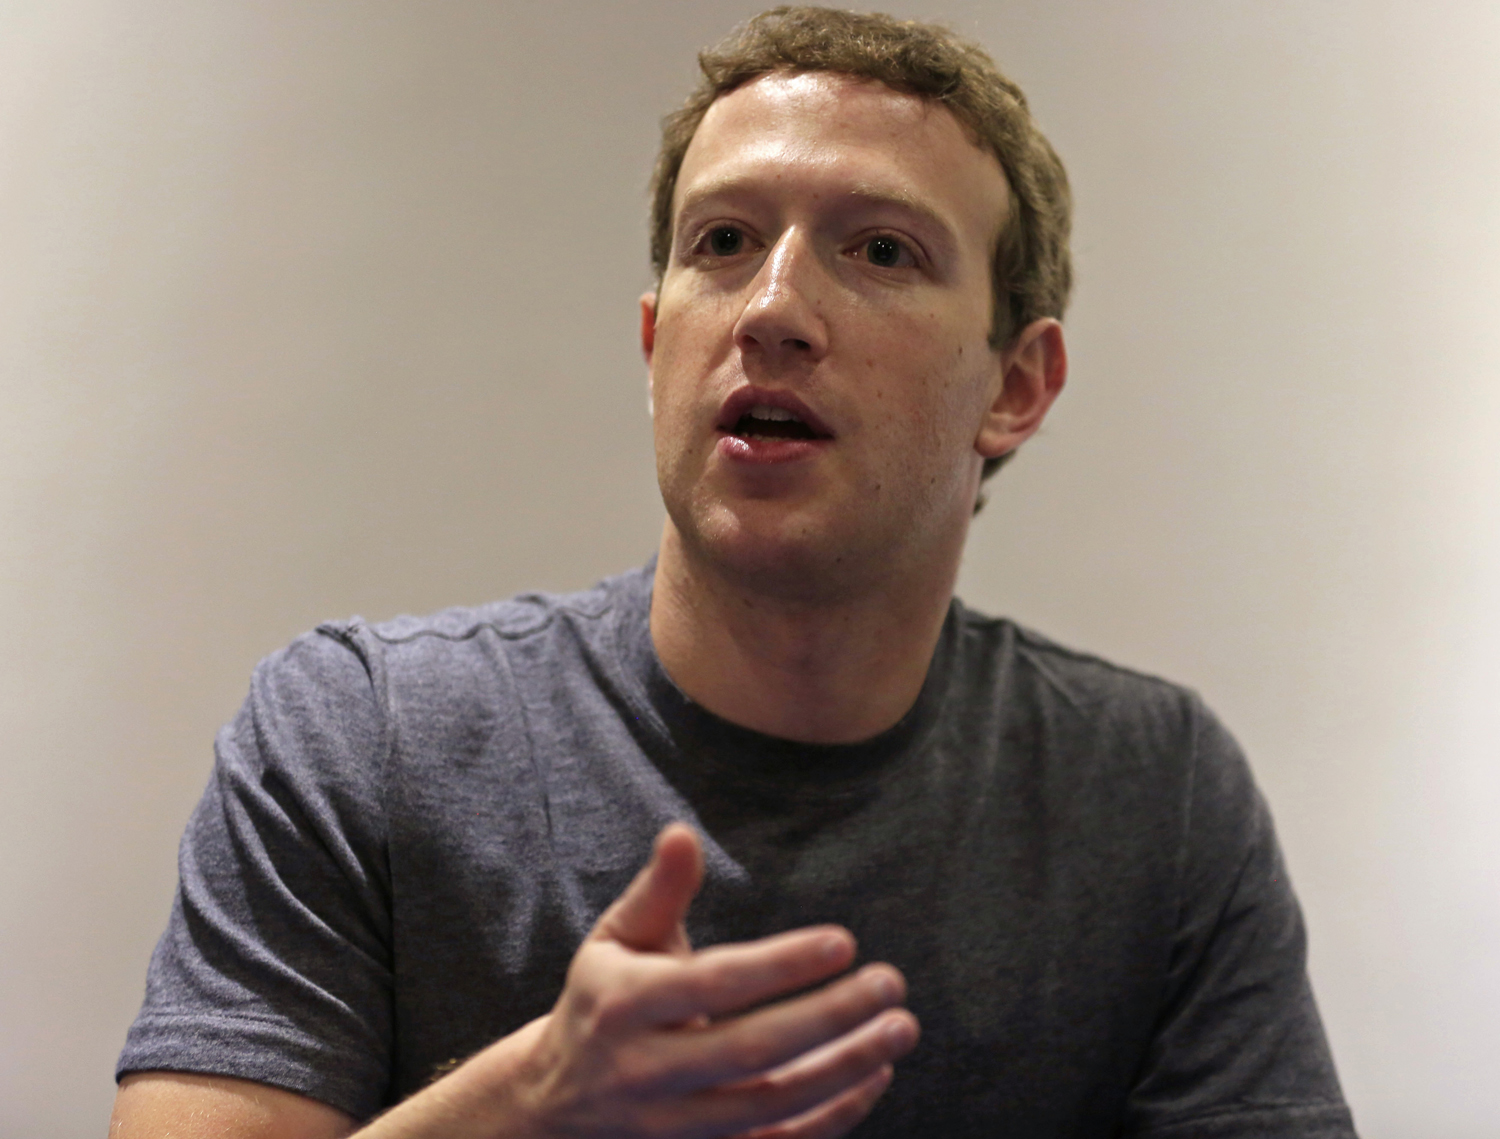 President, founder and CEO of Facebook Mark Zuckerberg speaks during a Reuters interview at the University of Bogota on Jan. 14, 2015. (Jose Gomez—Reuters)